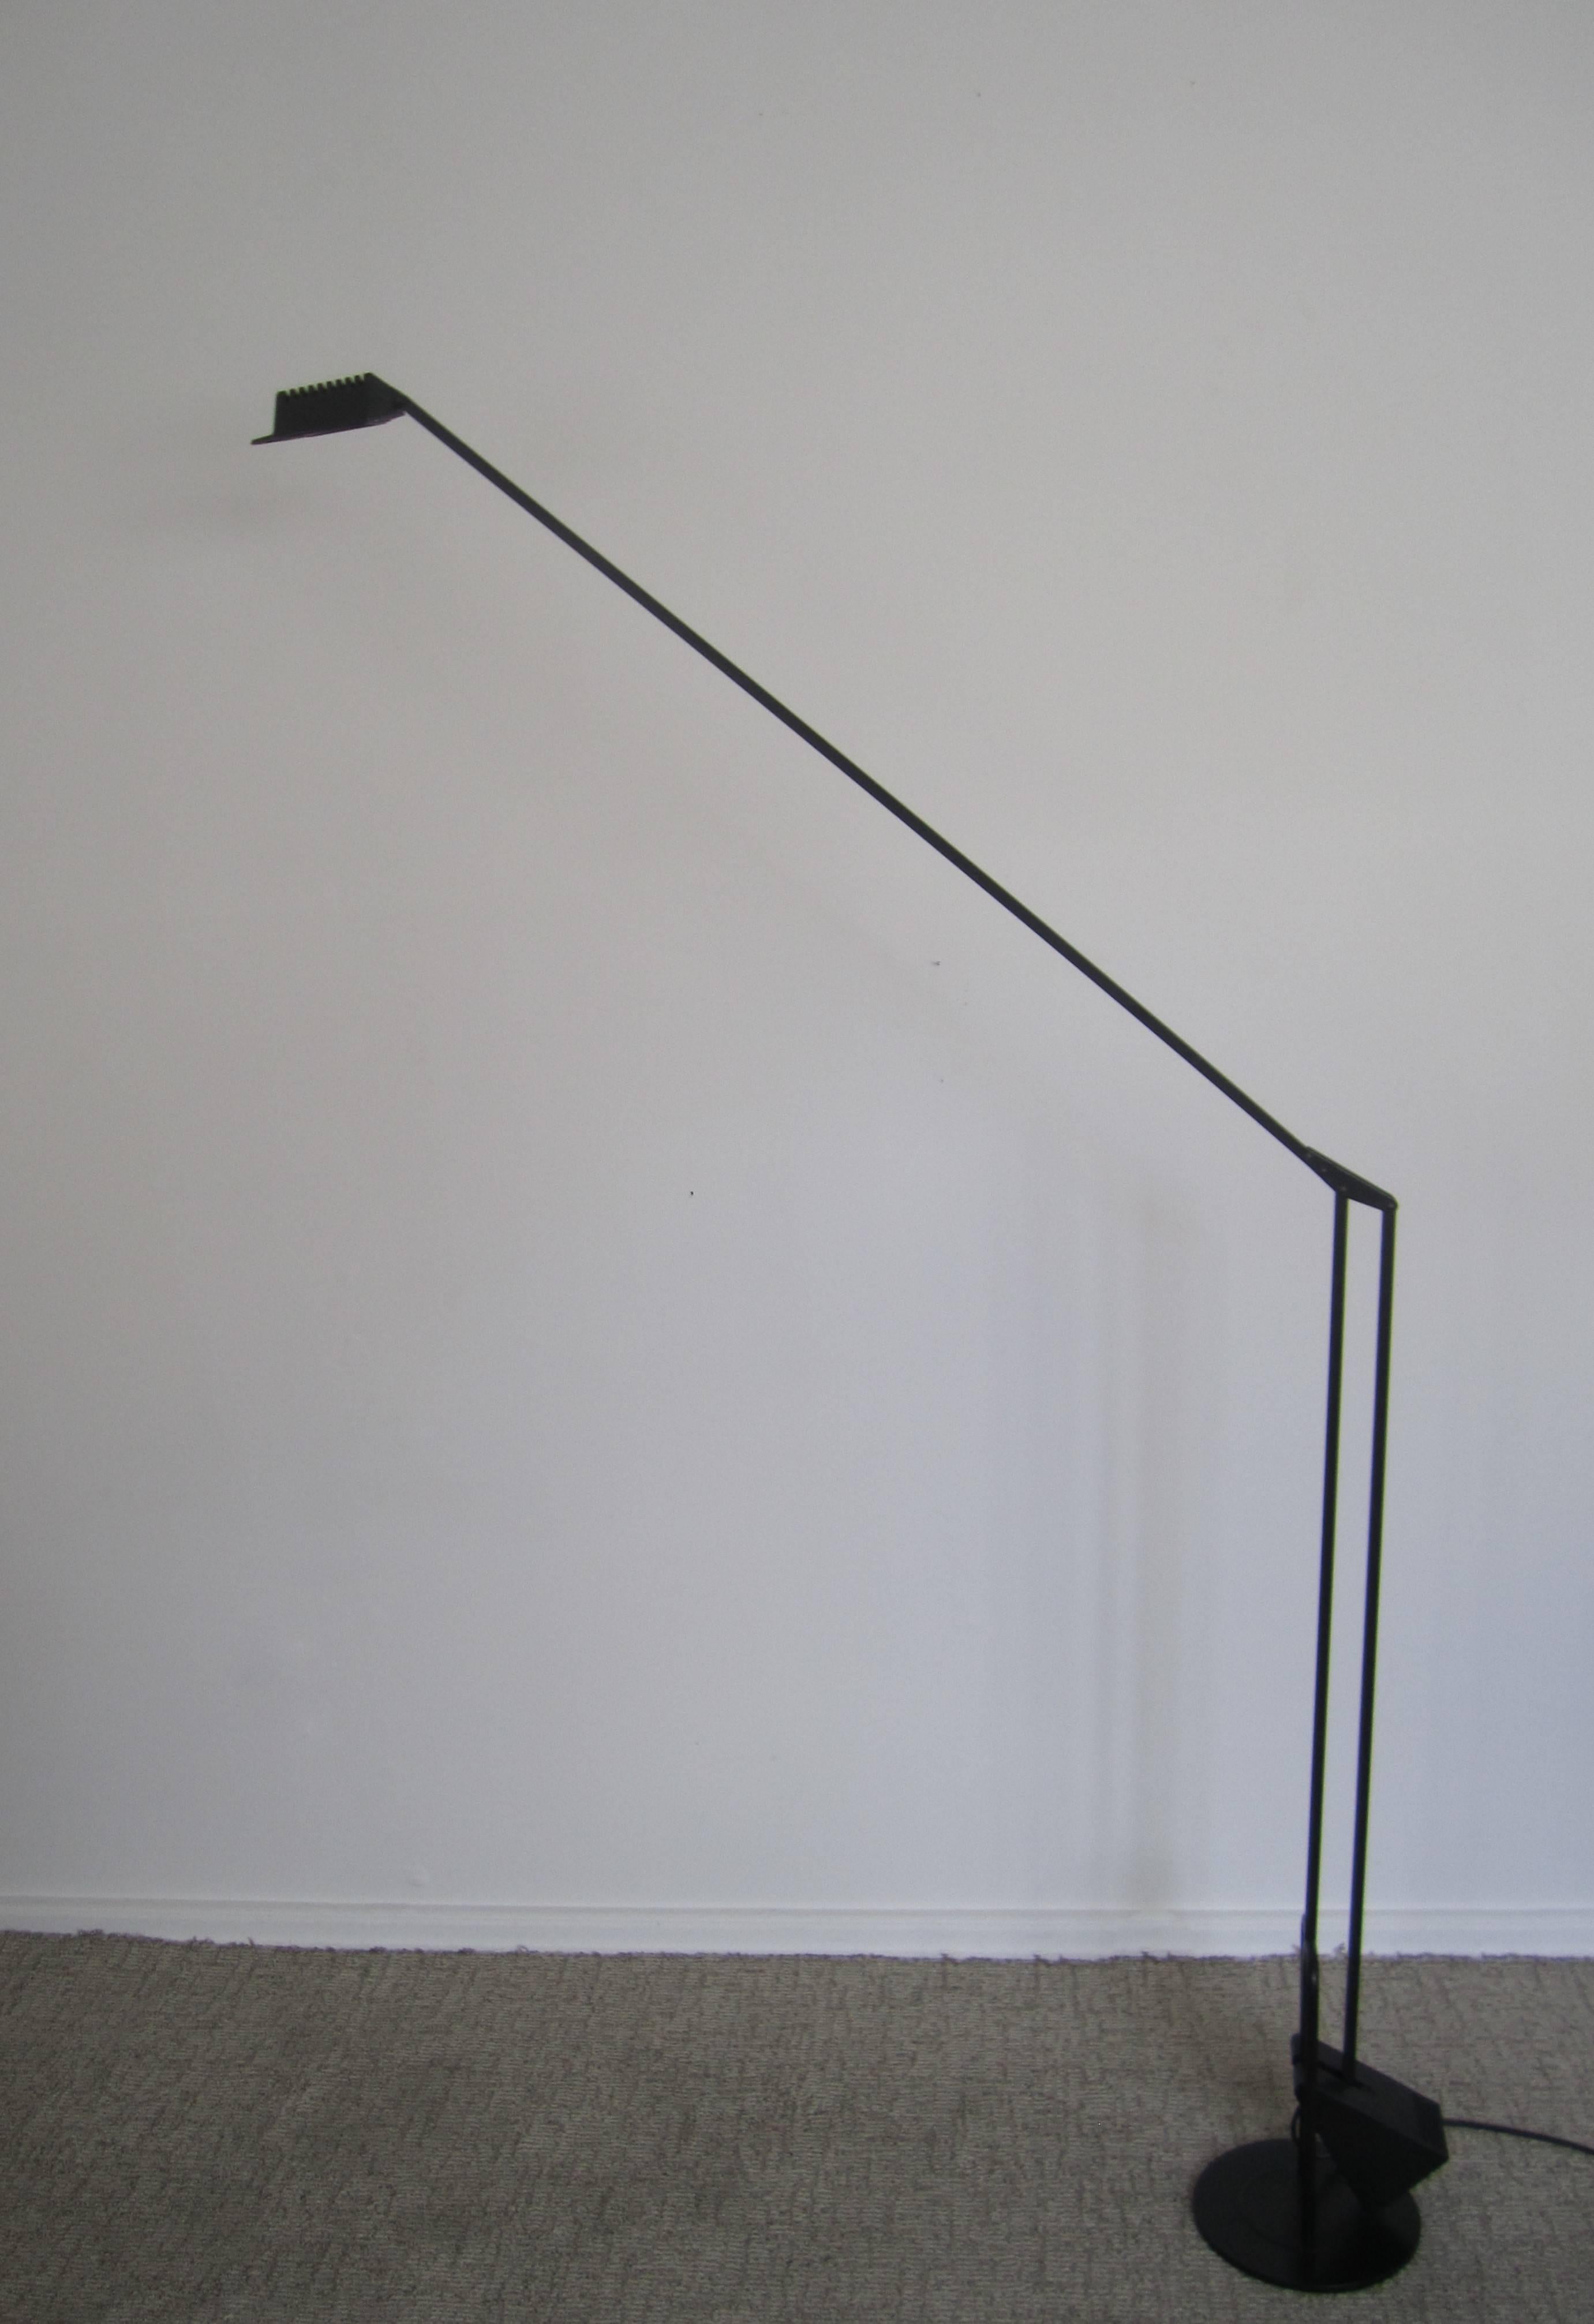 An amazing Minimalist Post-Modern [Postmodern] Italian black adjustable floor lamp by designer Fridolin Naef for LUXO, Italy, ca. 1980s. This floor lamp is known as the MOD Flamingo; a black metal sleek adjustable floor lamp - adjusting up to 73